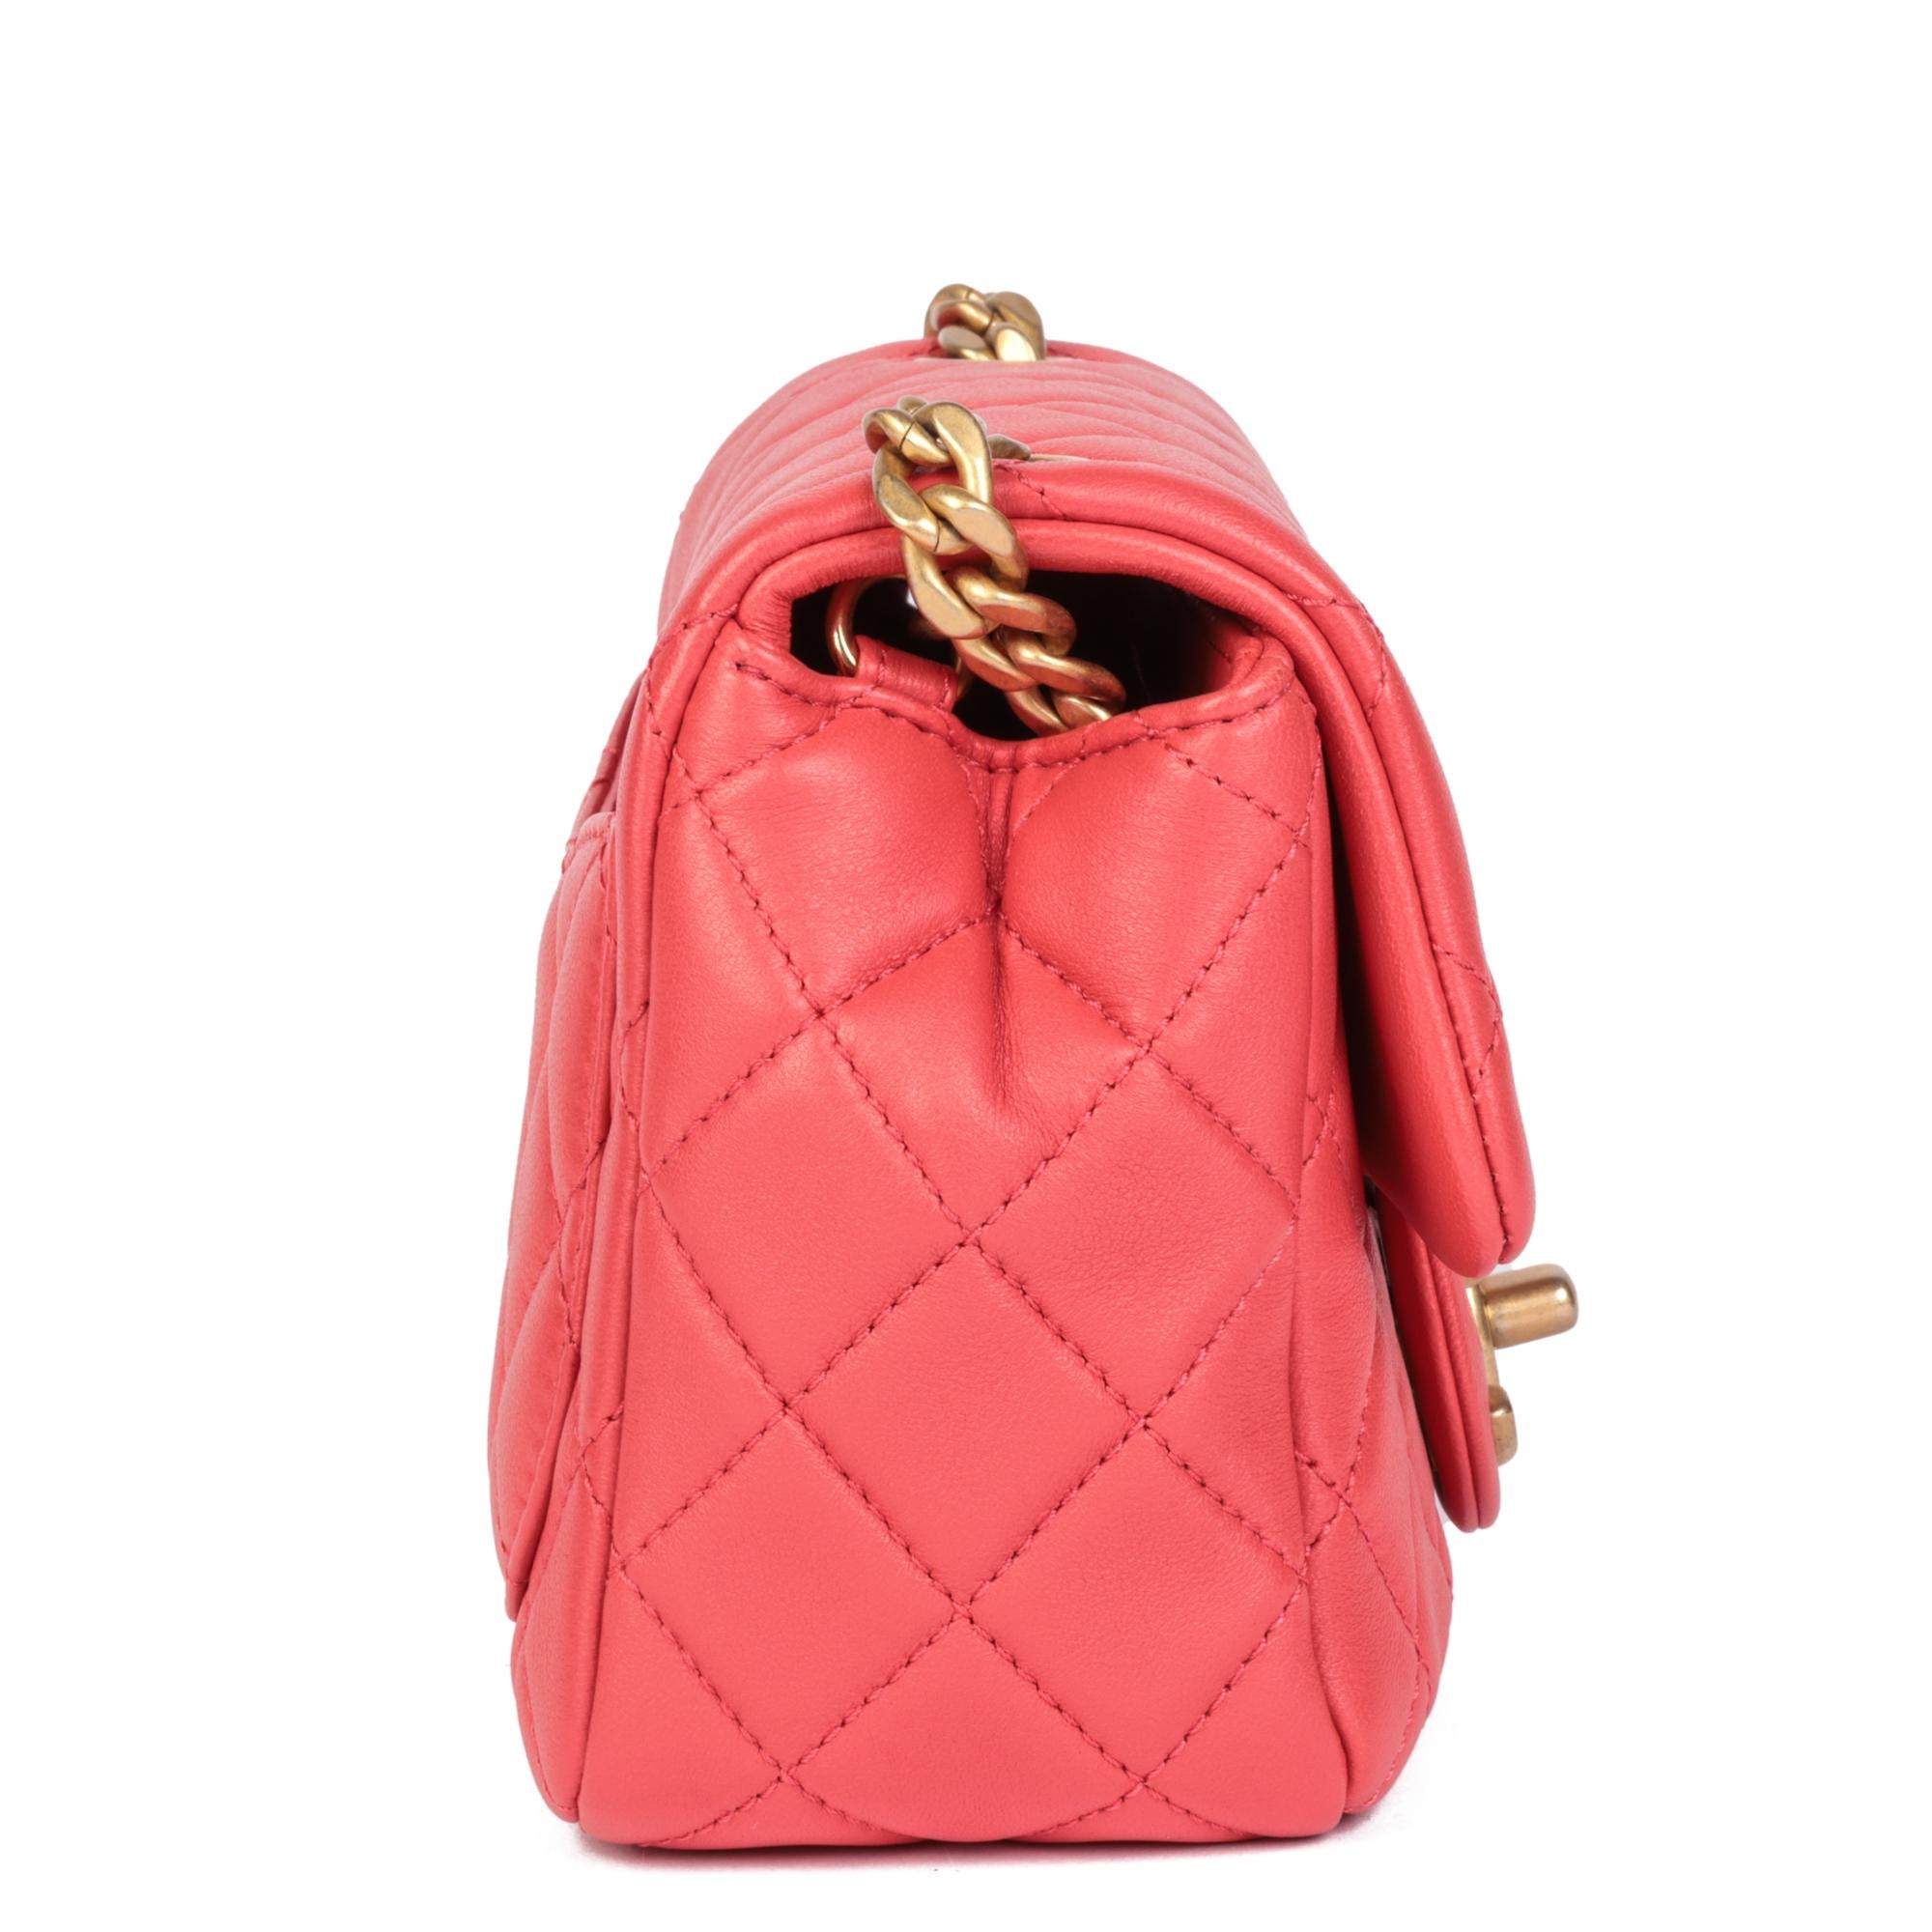 CHANEL Coral Red Quilted Lambskin Jewels Square Mini Flap Bag In Excellent Condition For Sale In Bishop's Stortford, Hertfordshire